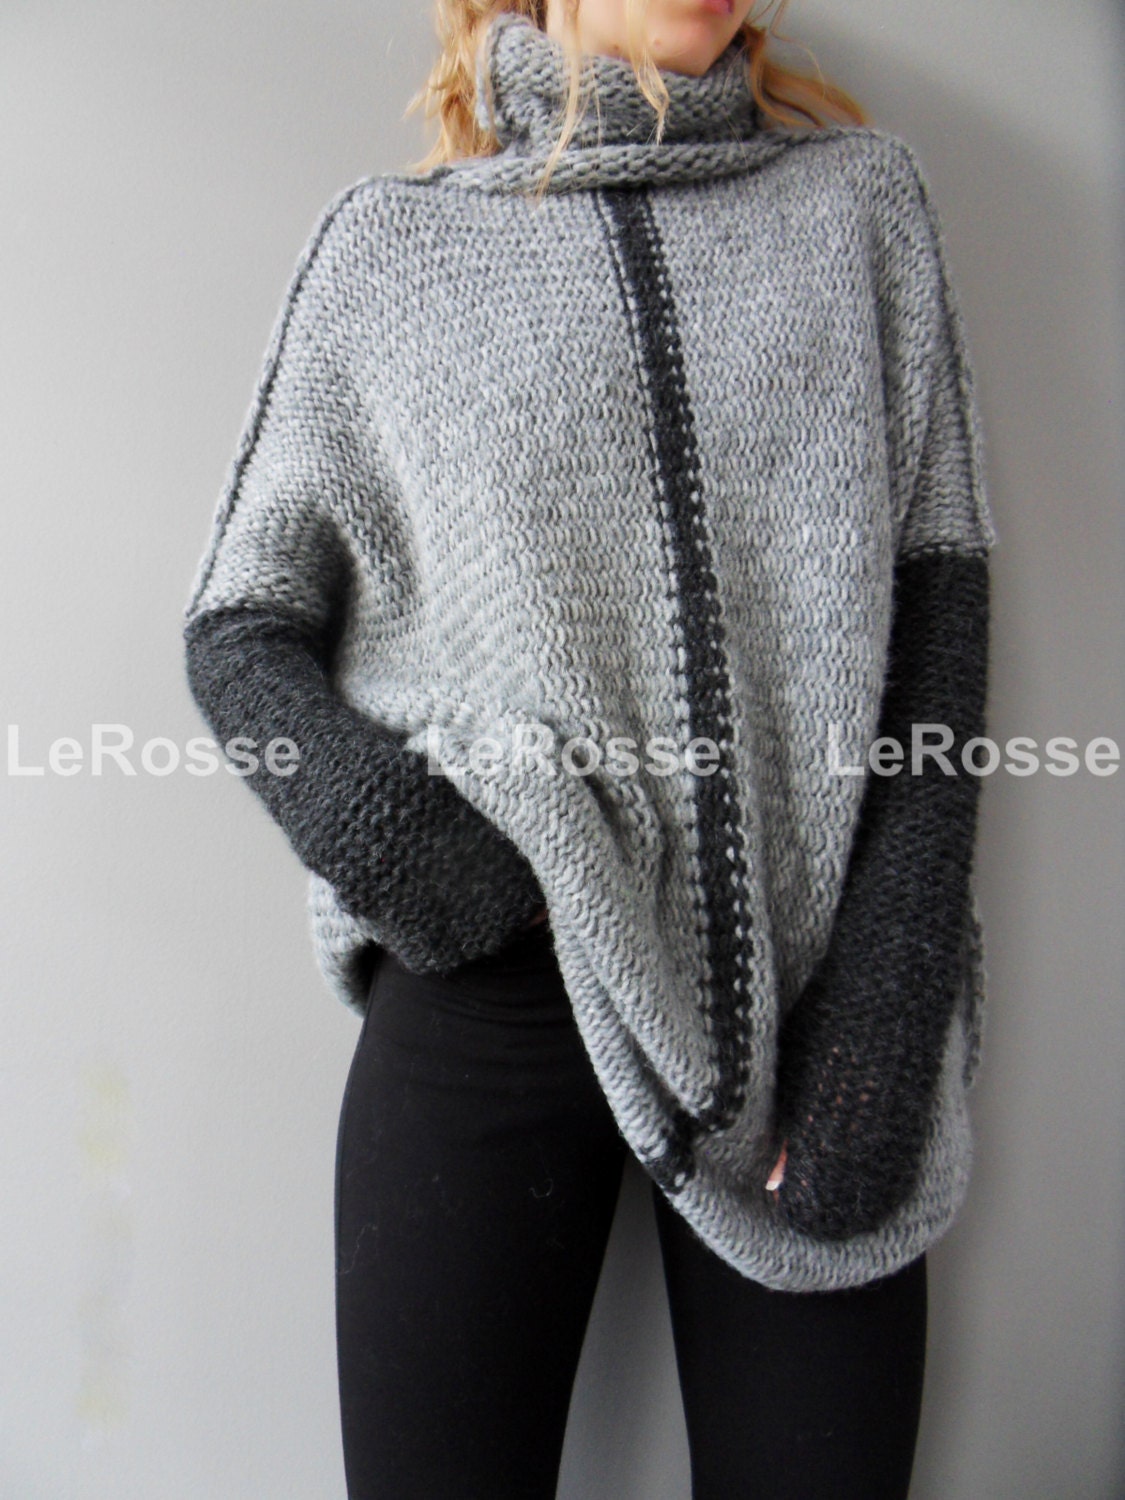 Oversized/Slouchy/Loose knit sweater. Aplaca sweater. Chunky